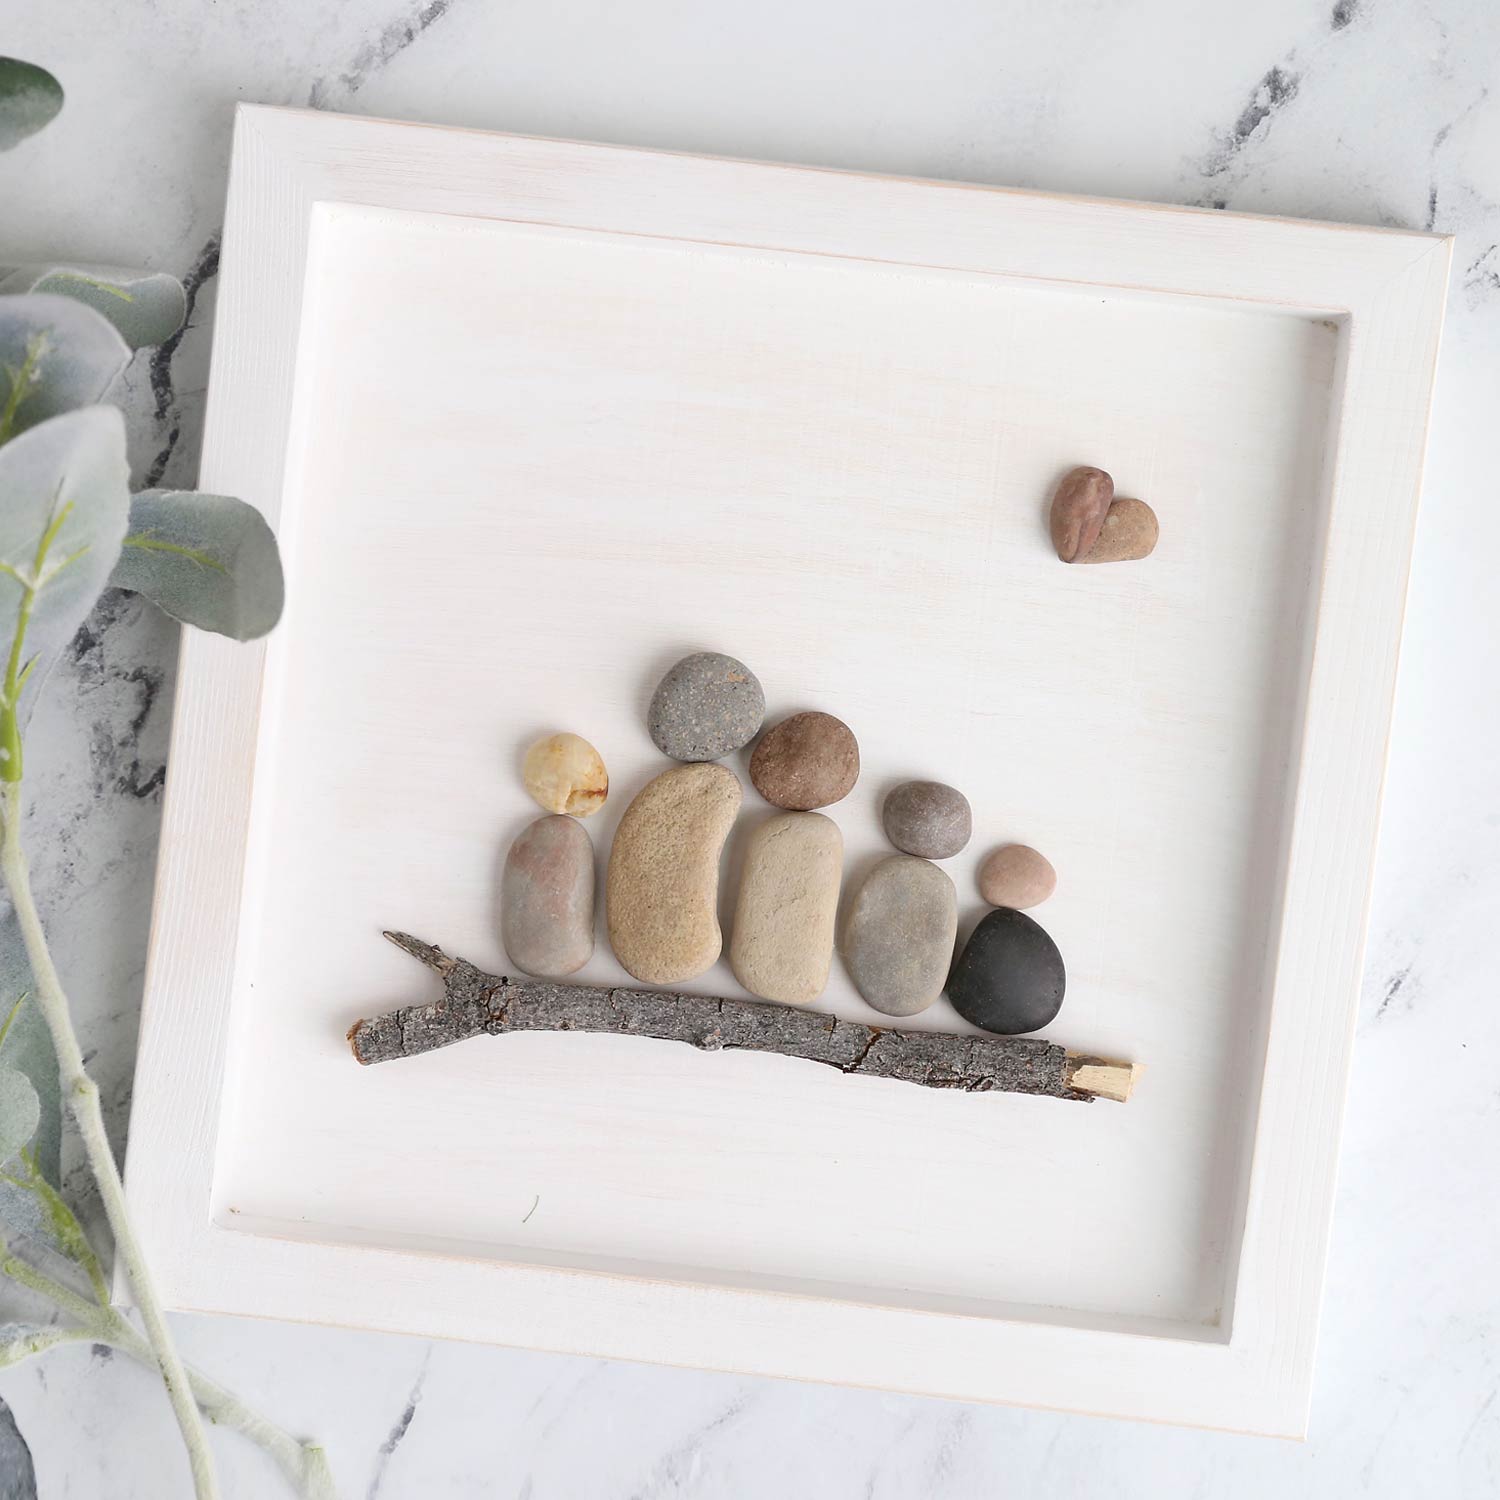 Cool Crafts Made from Rocks, Pebbles, and Stones